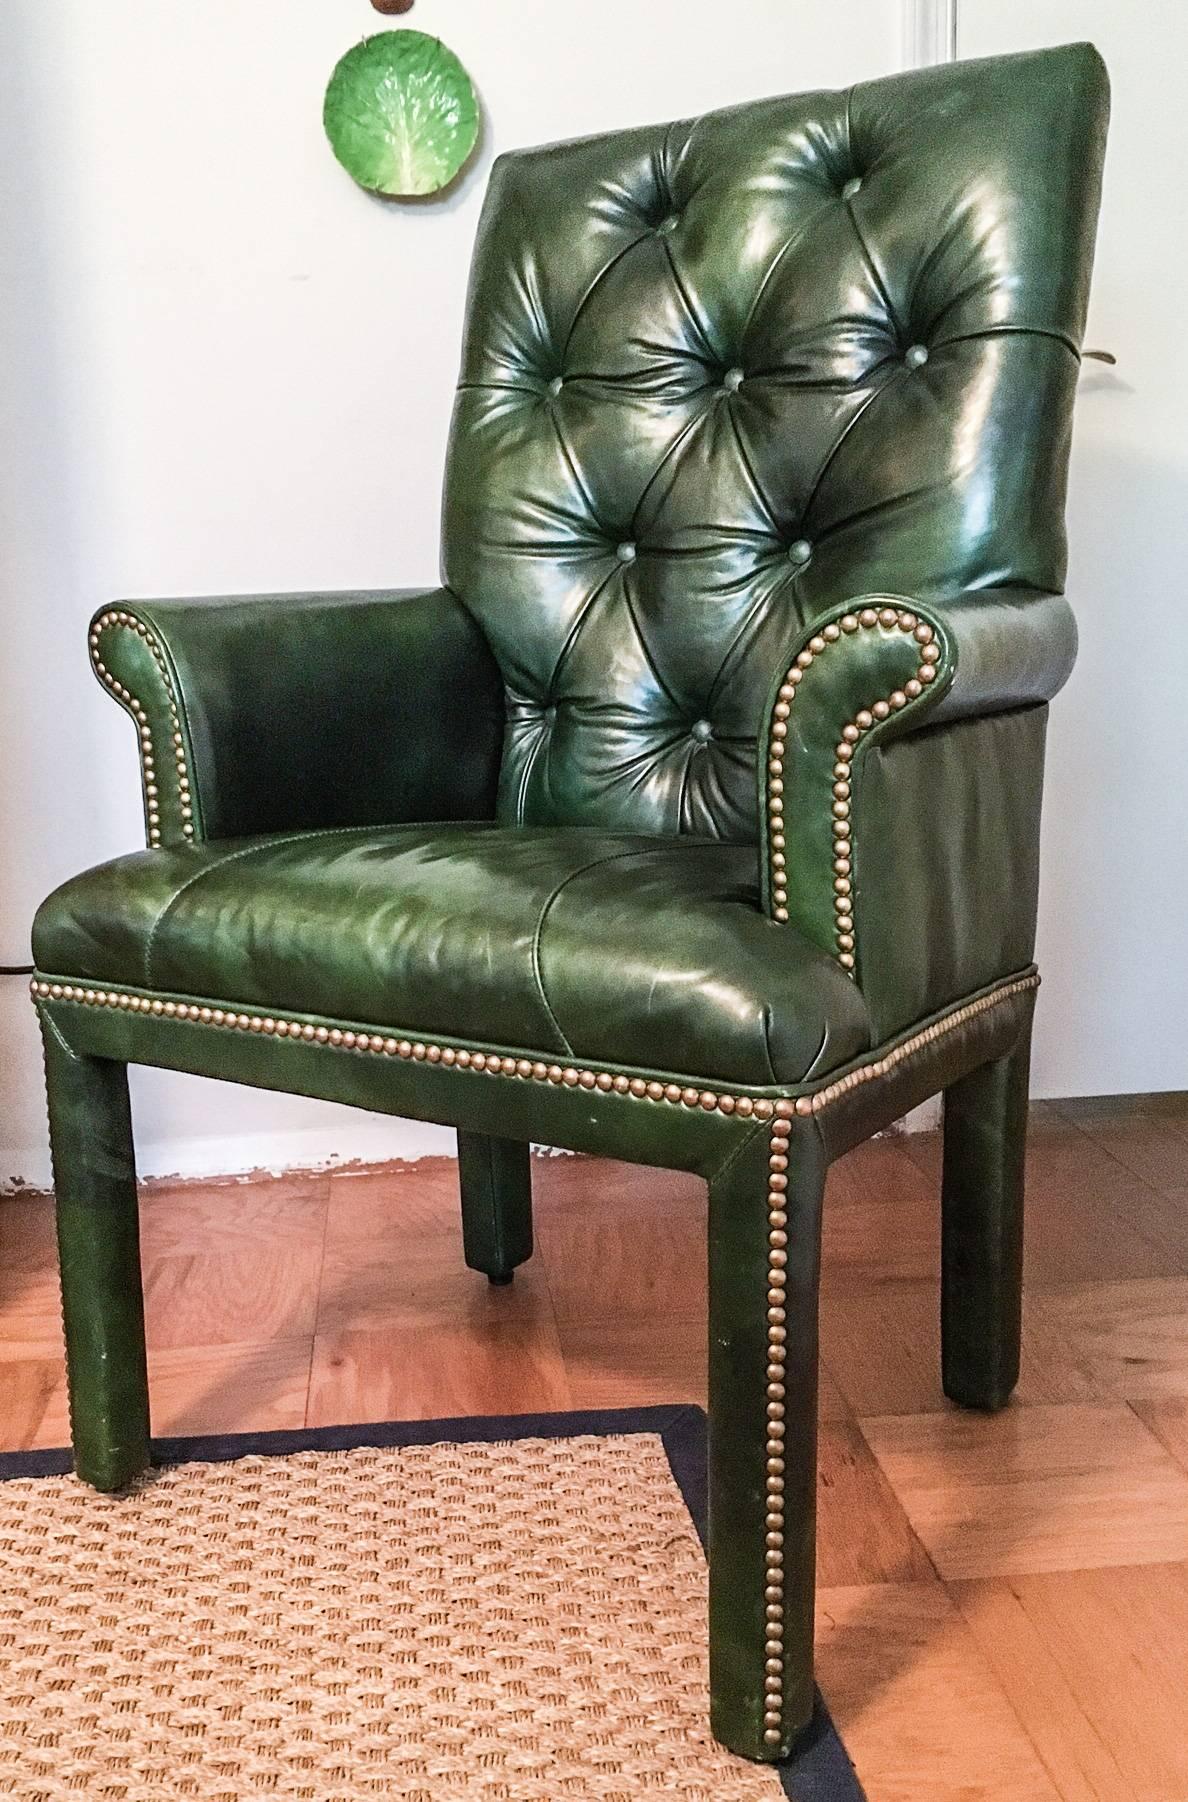 Fabulous tufted leather armchair by Michael Thomas Furniture, fully upholstered over a hardwood frame in a sensuous emerald green leather by Moore & Giles. Chair is finished with brass nail-head trim. A couple light scratches on the seat, which